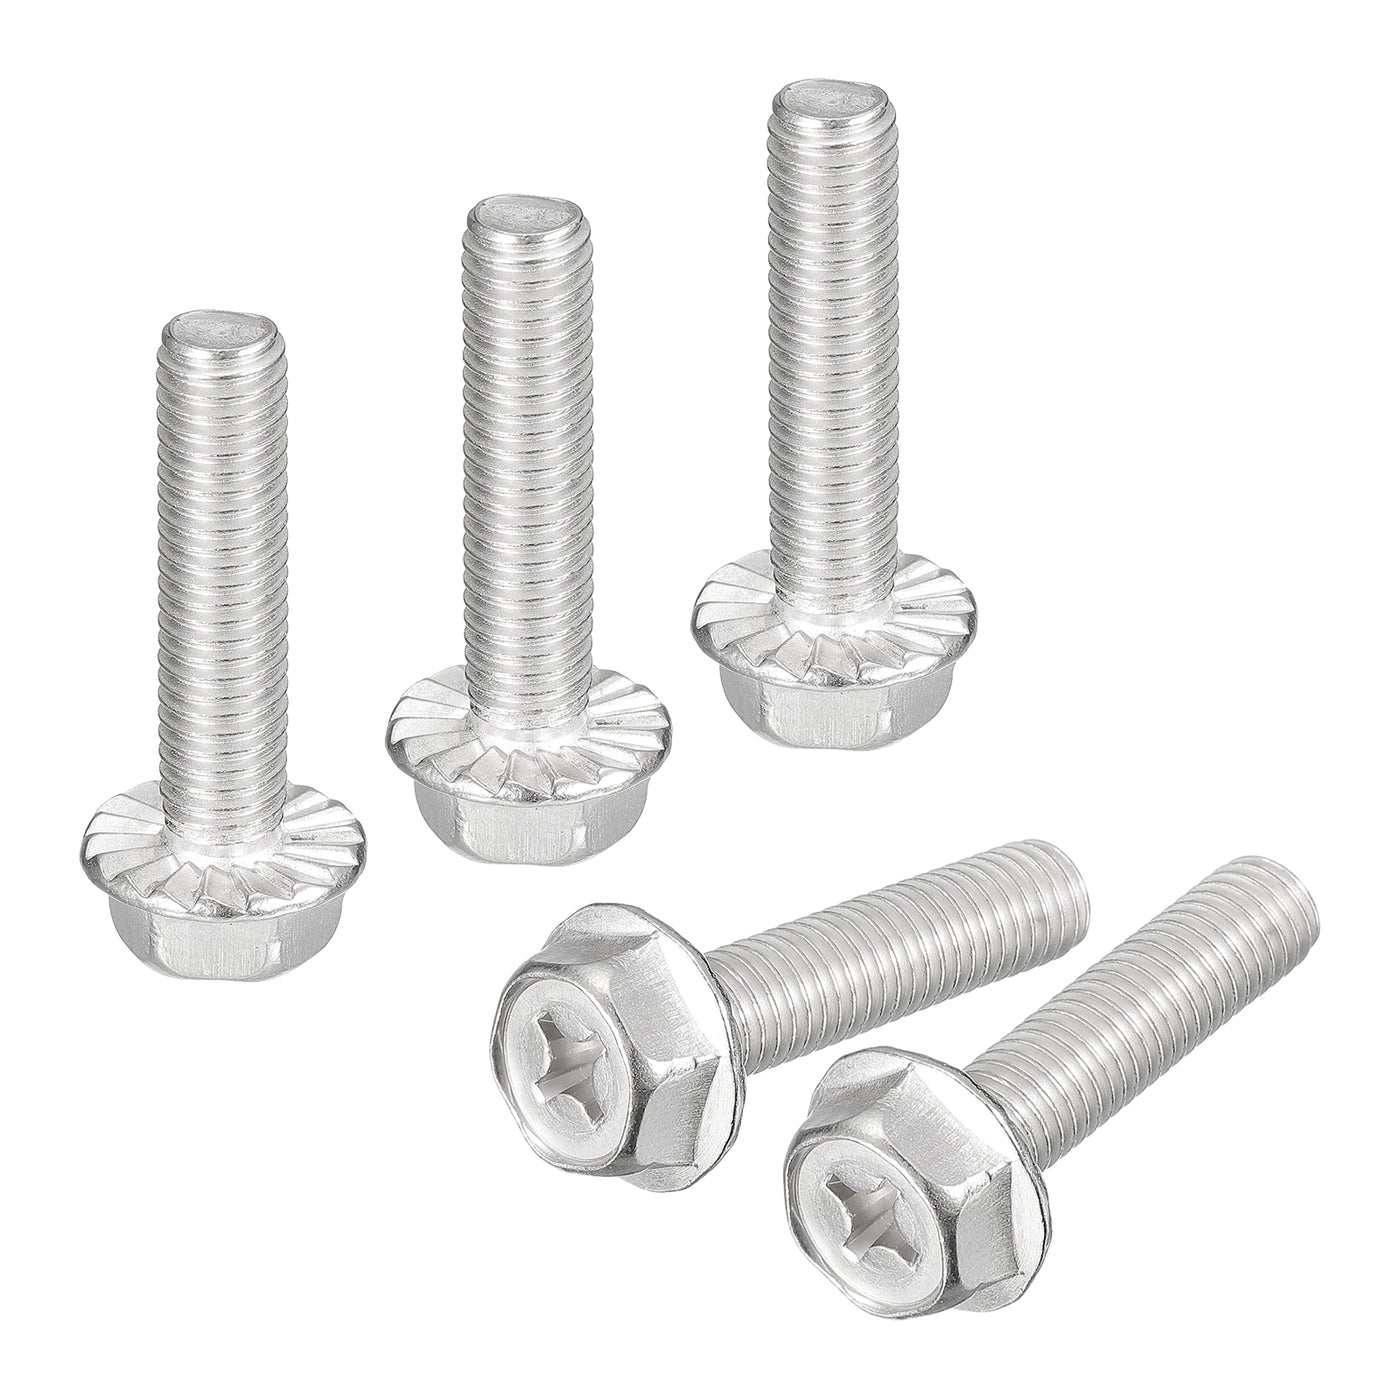 uxcell Uxcell M8x35mm Phillips Hex Head Flange Bolts, 10pcs 304 Stainless Steel Screws